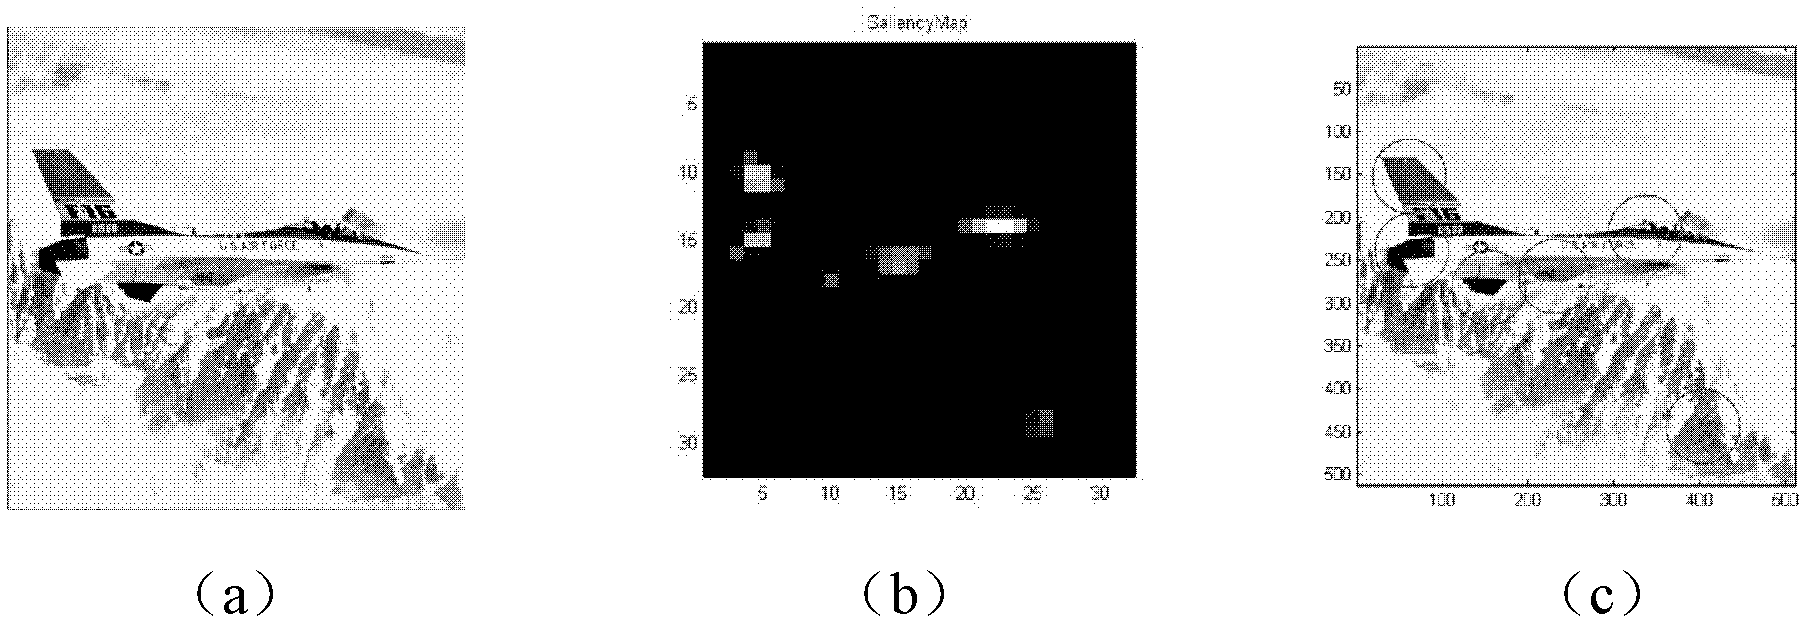 Visual-saliency-based image non-watermark algorithm and image copyright authentication method